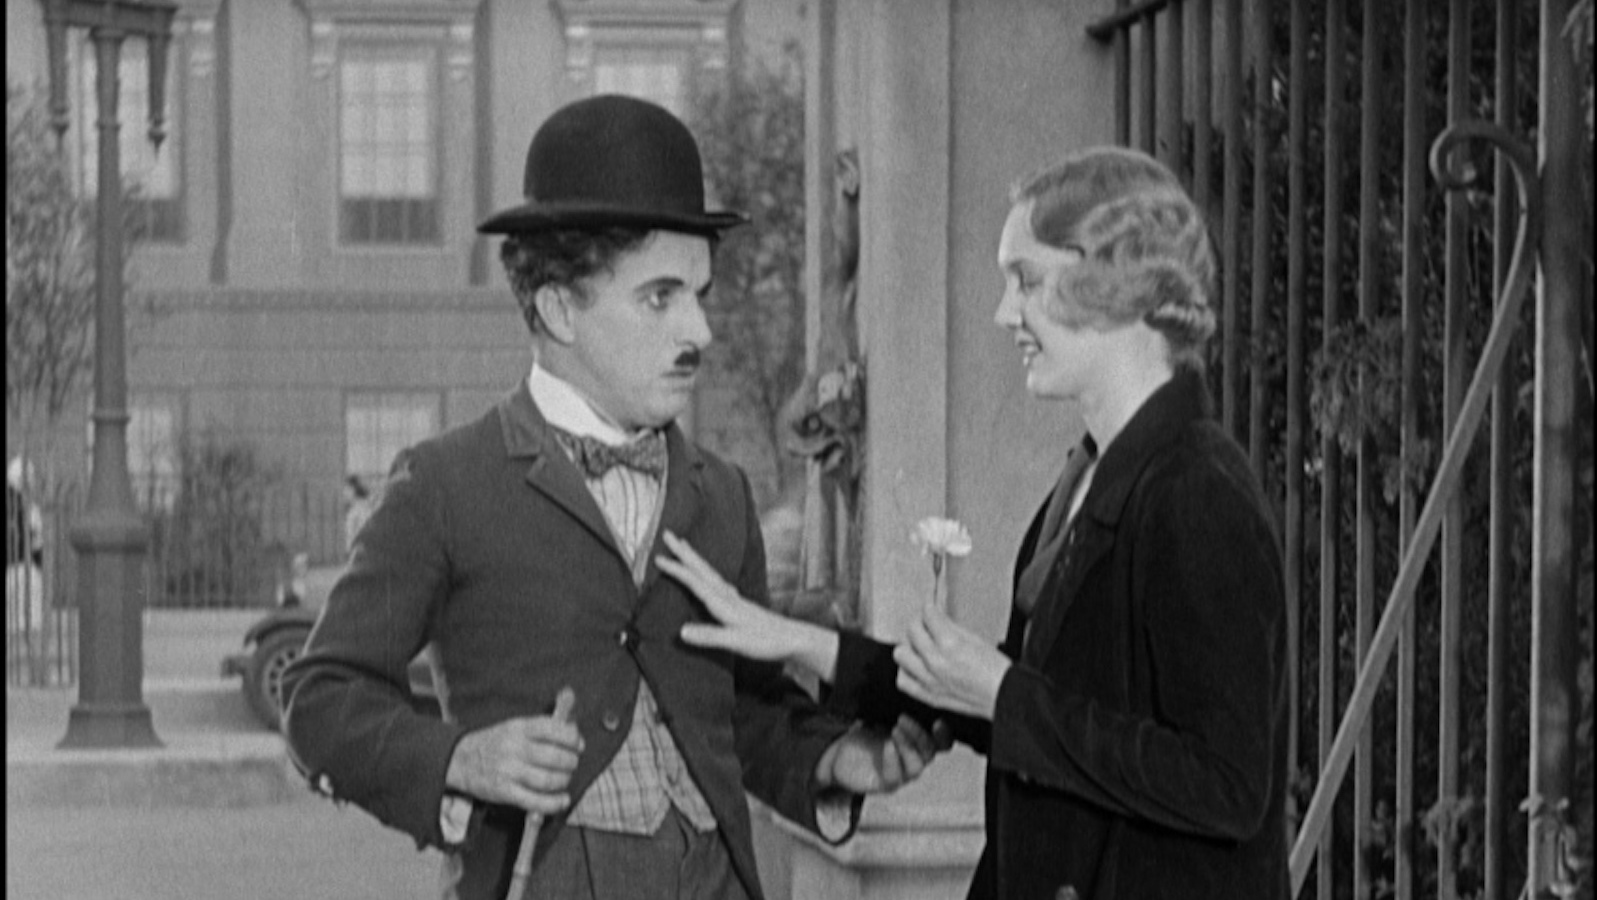 A little tramp in his bowler hat looks at a young woman holding a flower and smiling